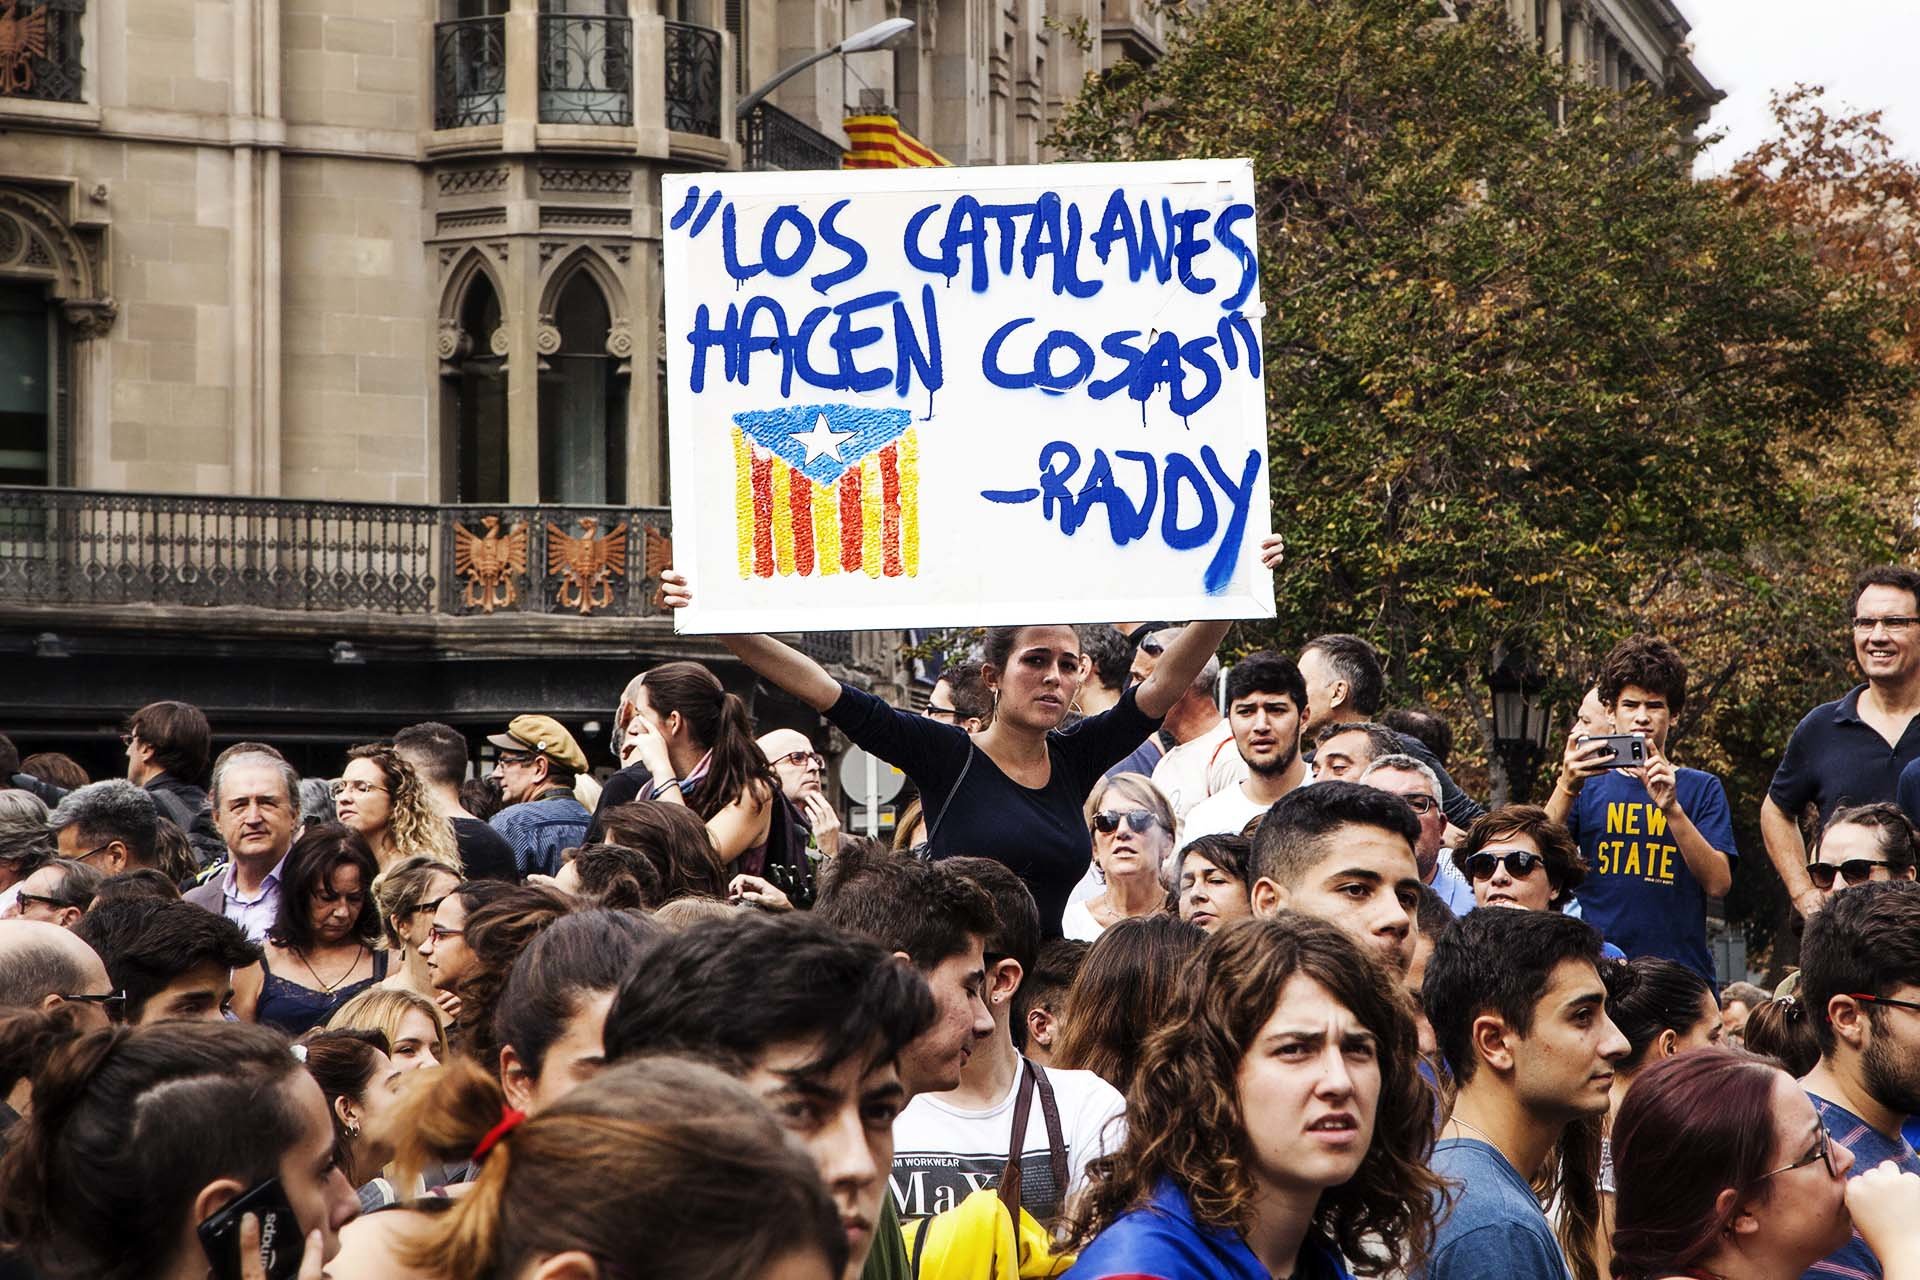 Protesters in a demonstration for the police brutality lived in the referendum of 1 October for the independence of Catalonia.